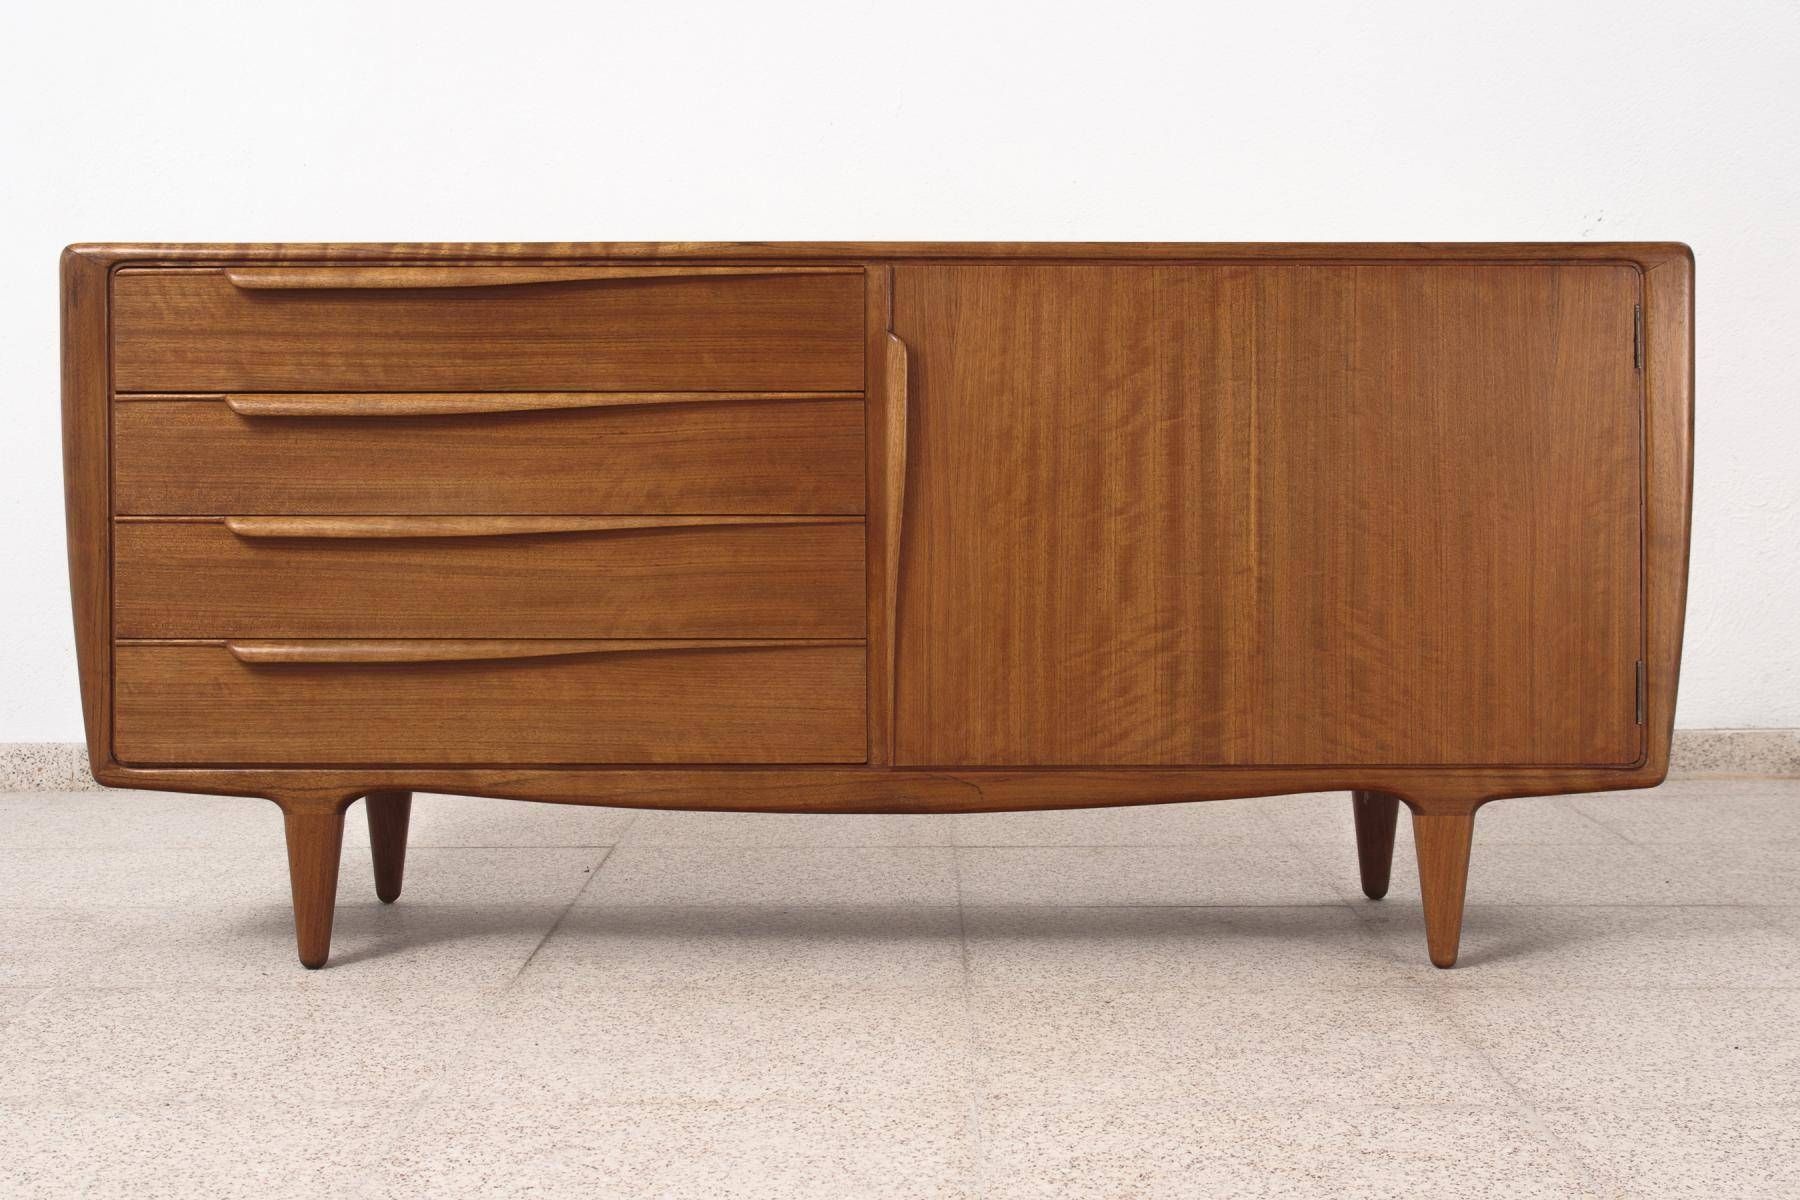 Danish Curved Teak Wood Sideboard, 1960s For Sale At Pamono With Regard To Curved Sideboard (View 2 of 20)